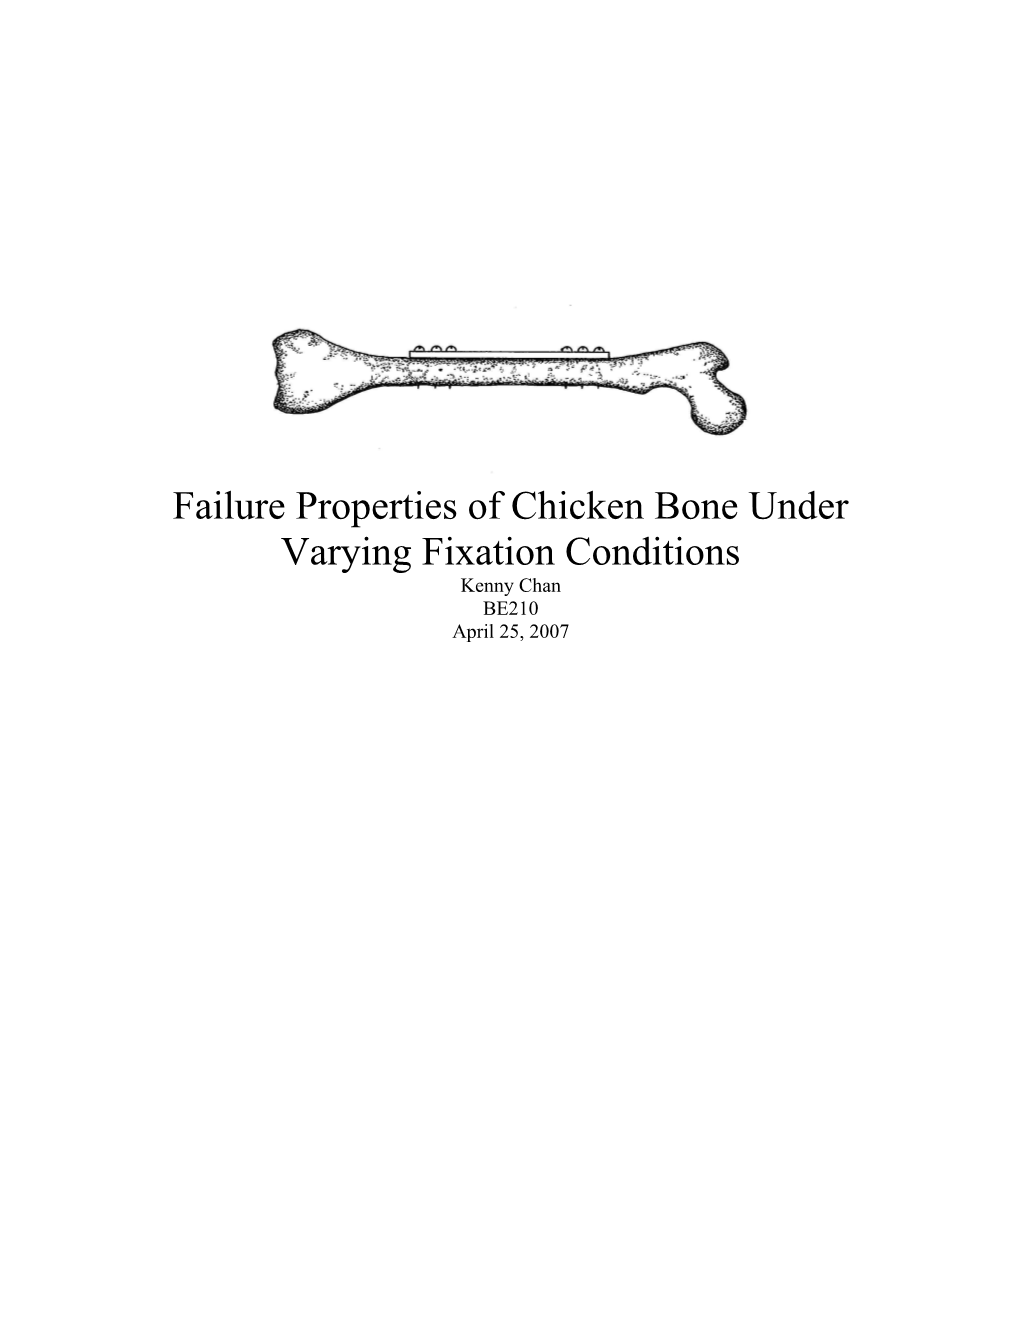 Failure Properties of Chicken Bone Under Varying Fixation Conditions